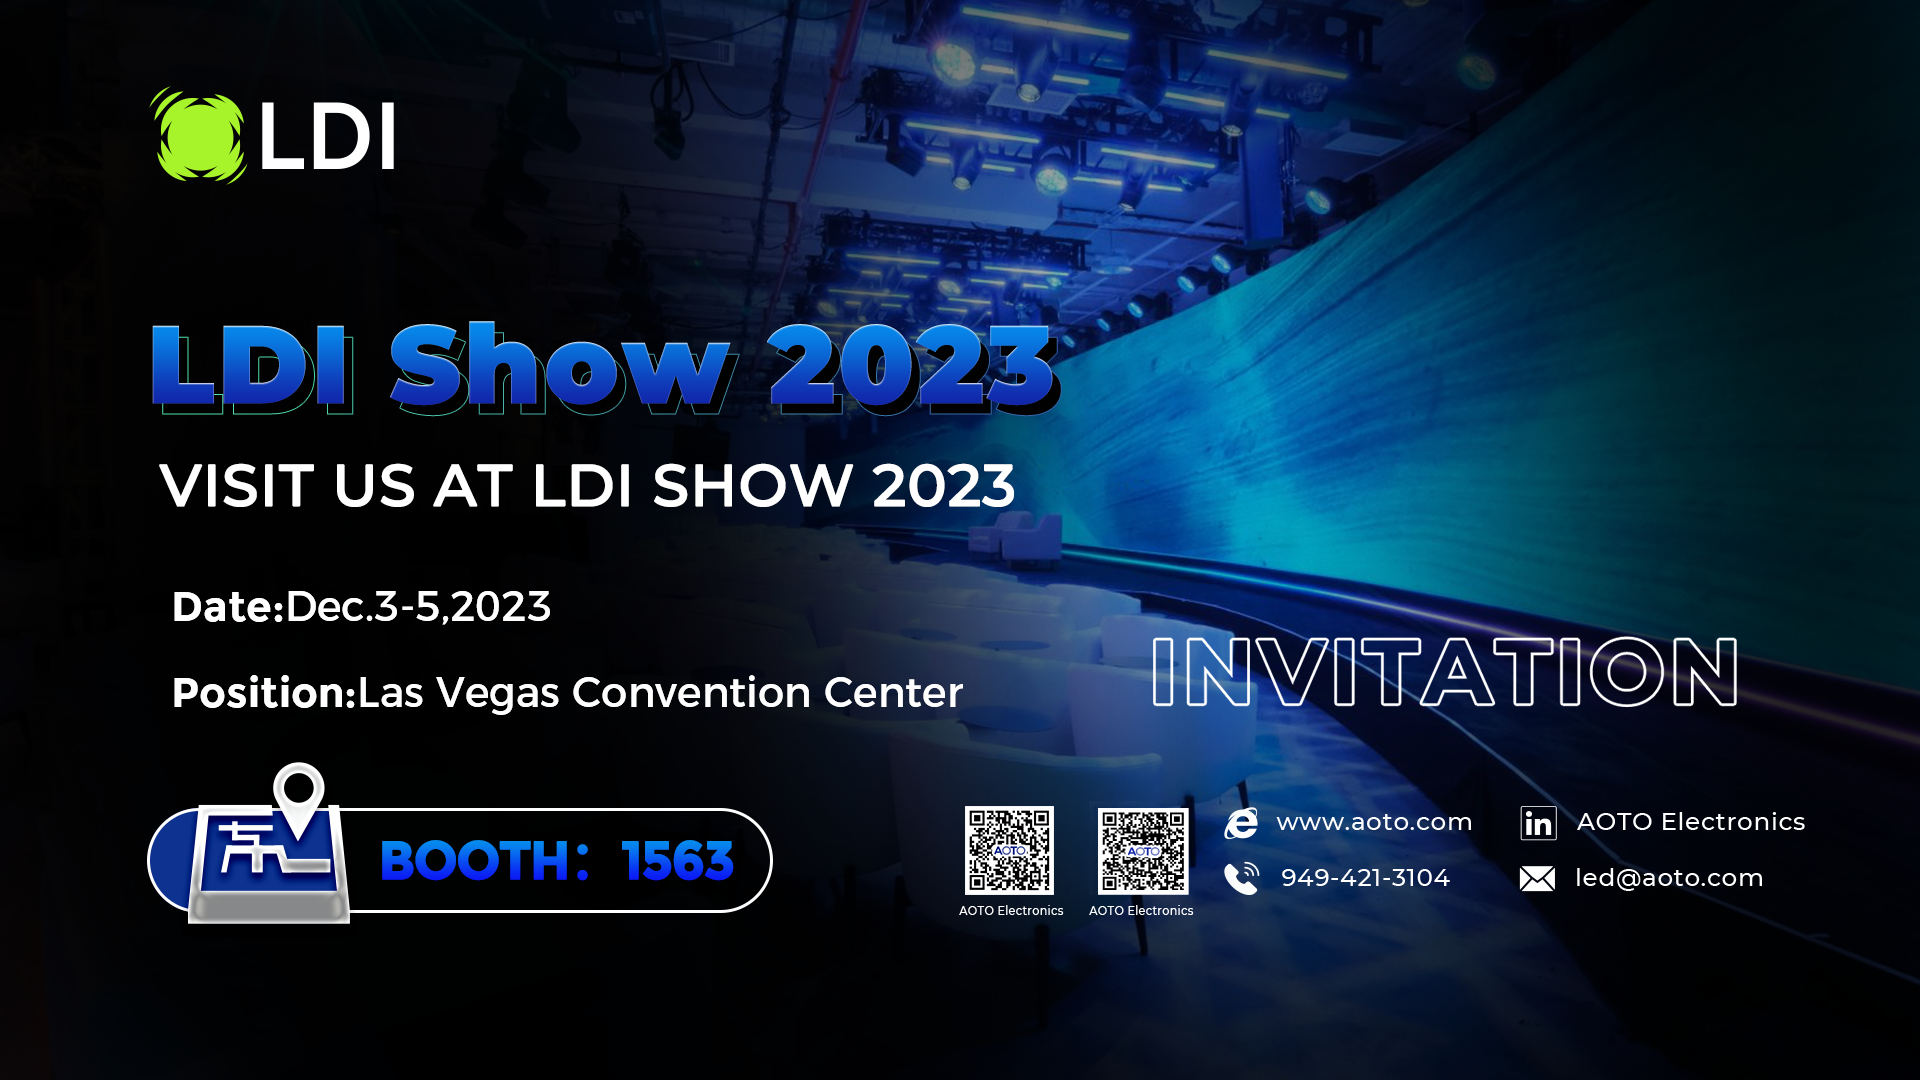 AOTO Brings Cutting-Edge Rental New Products and XR/VP Virtual Production to LDI SHOW 2023 in the U.S.